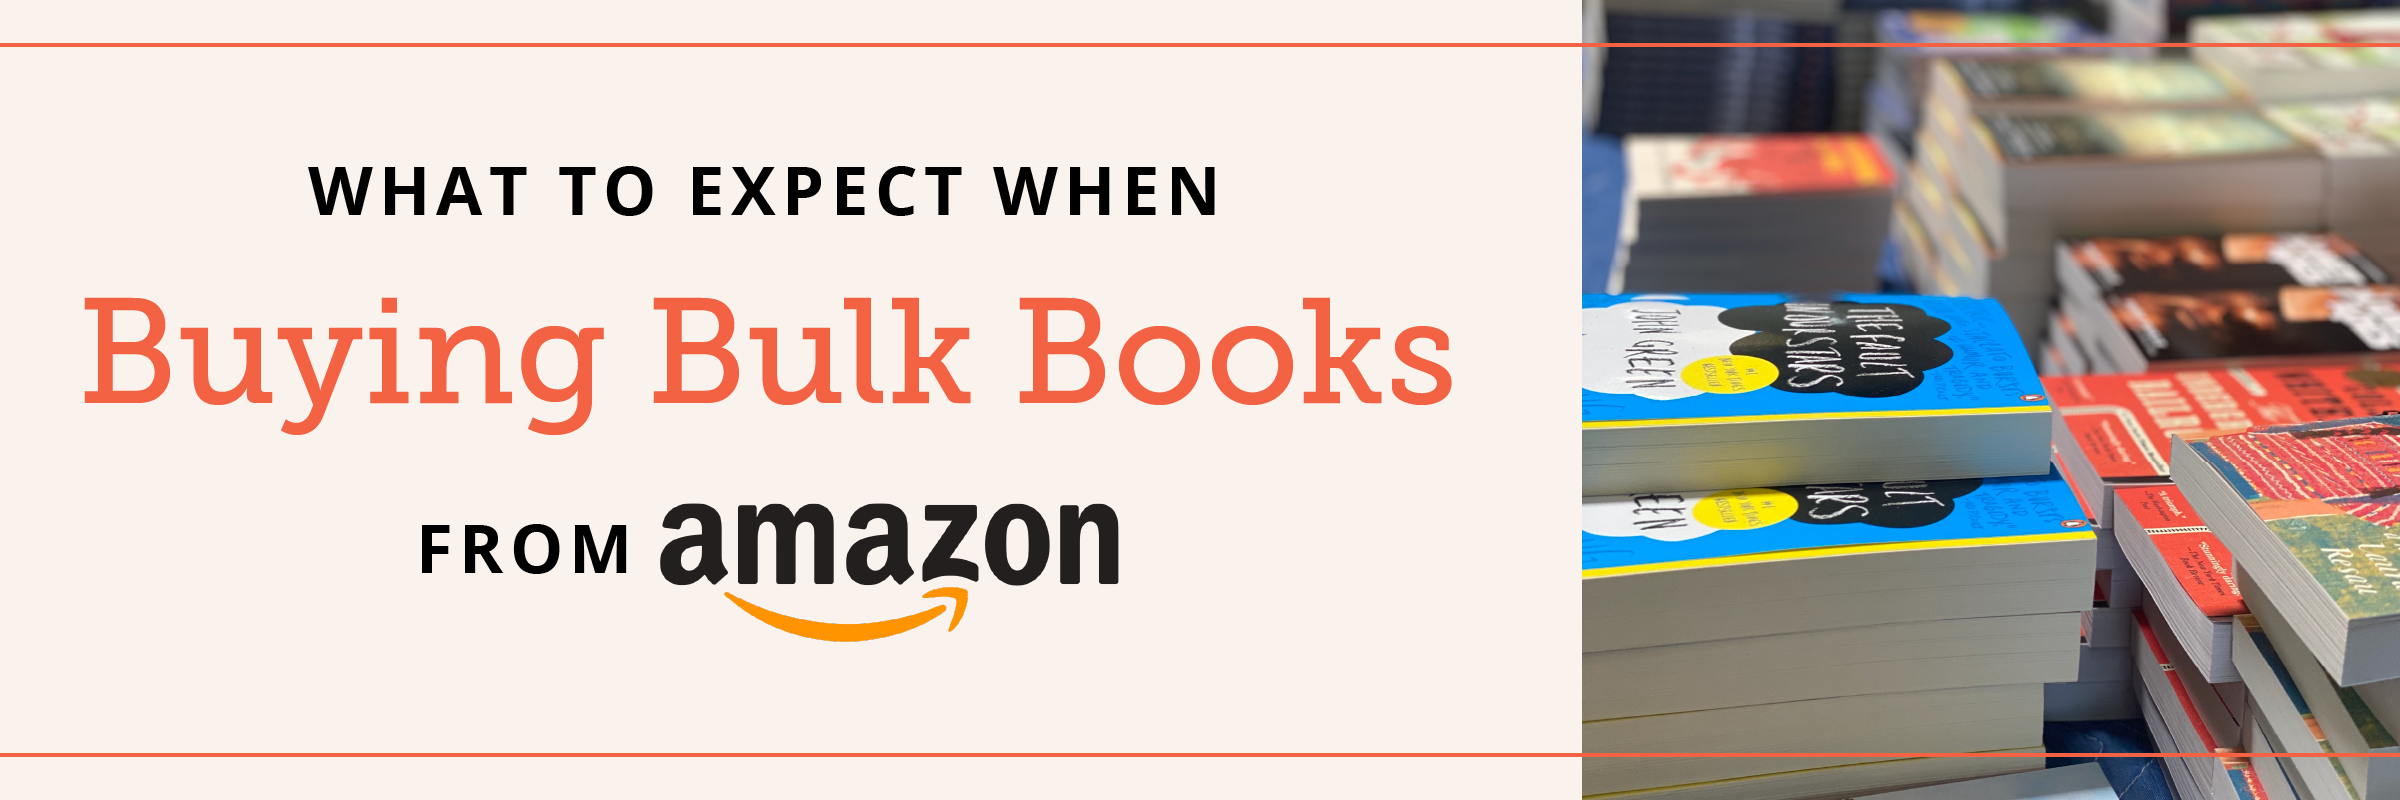 https://bookpal.com/product_images/uploaded_images/buying-bulk-books-from-amazon-header-.png